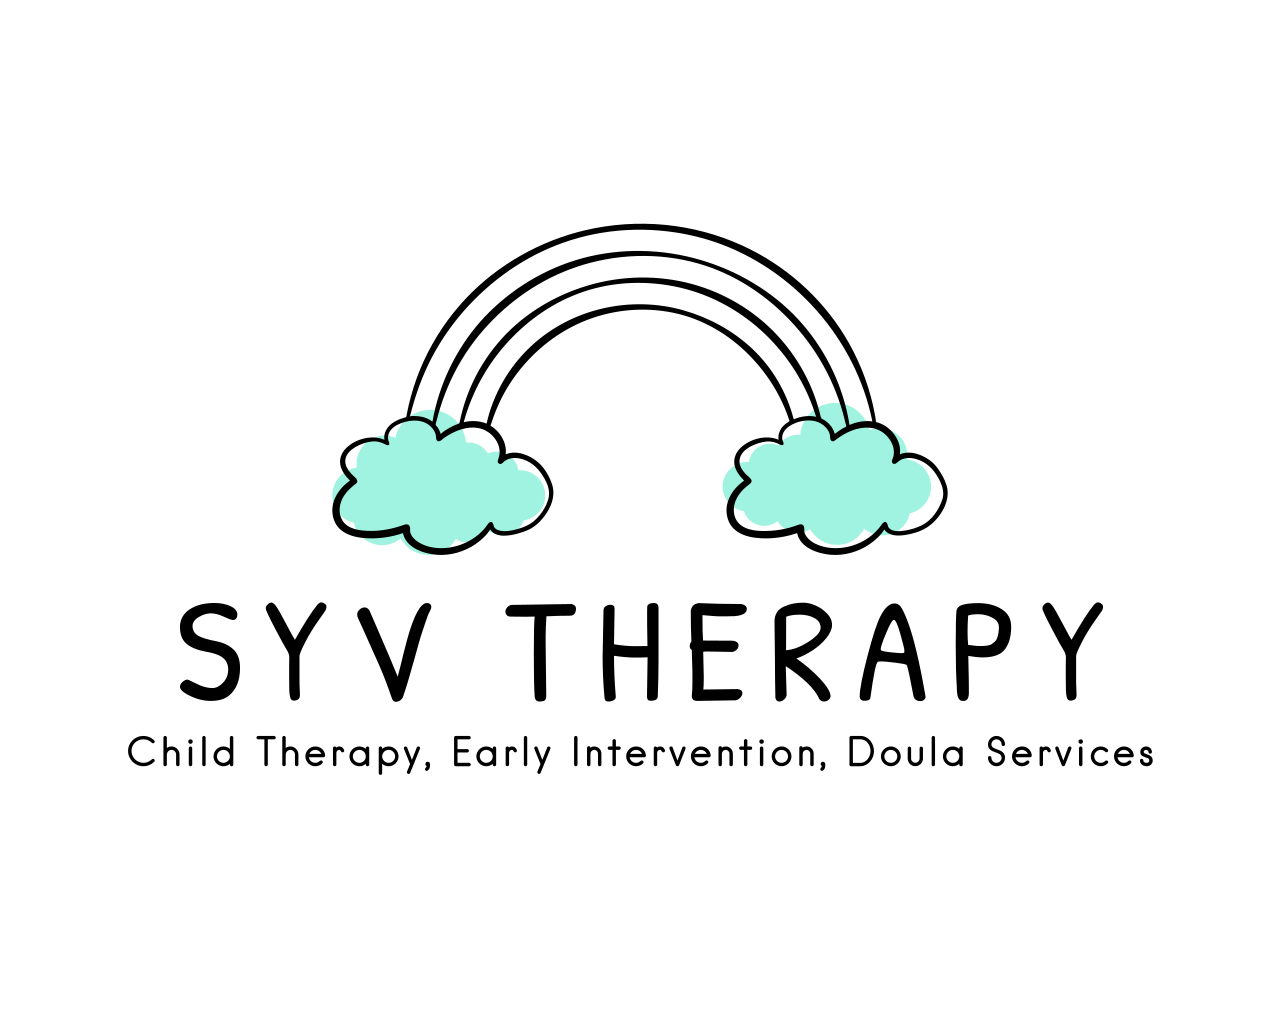 SYV Therapy